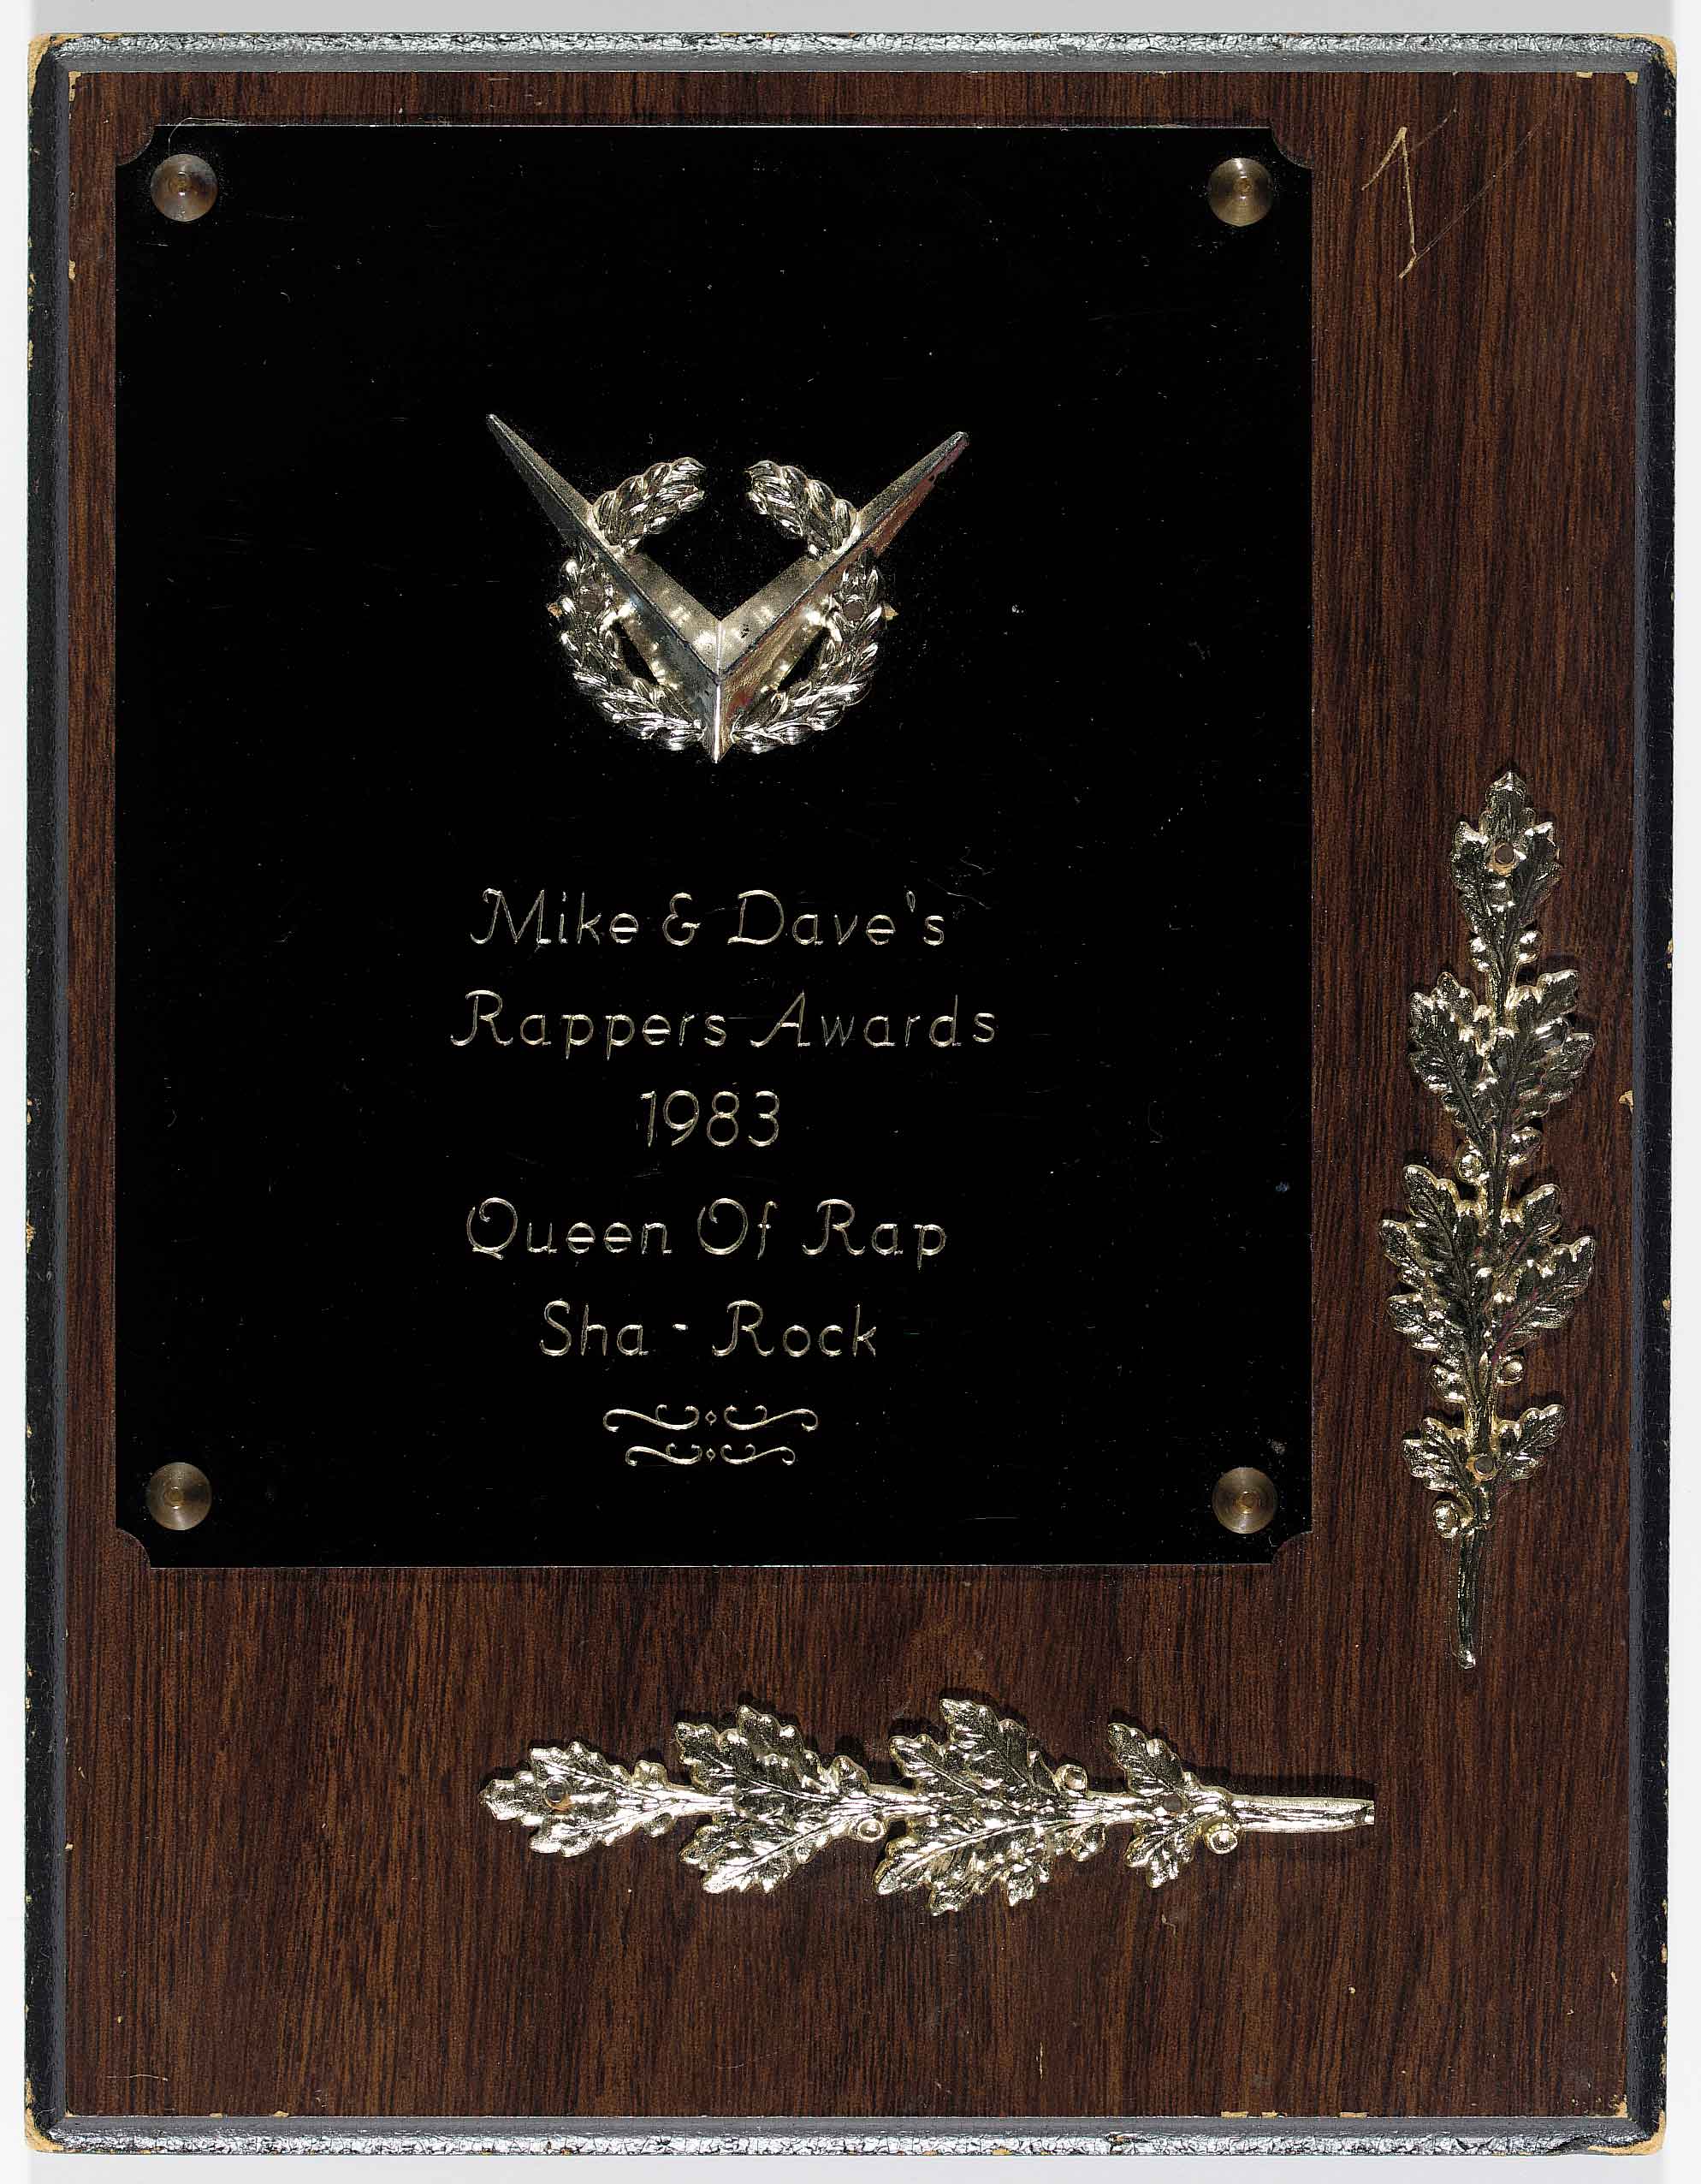 Mike and Dave’s Rappers Award for “Queen of Rap” in 1983.